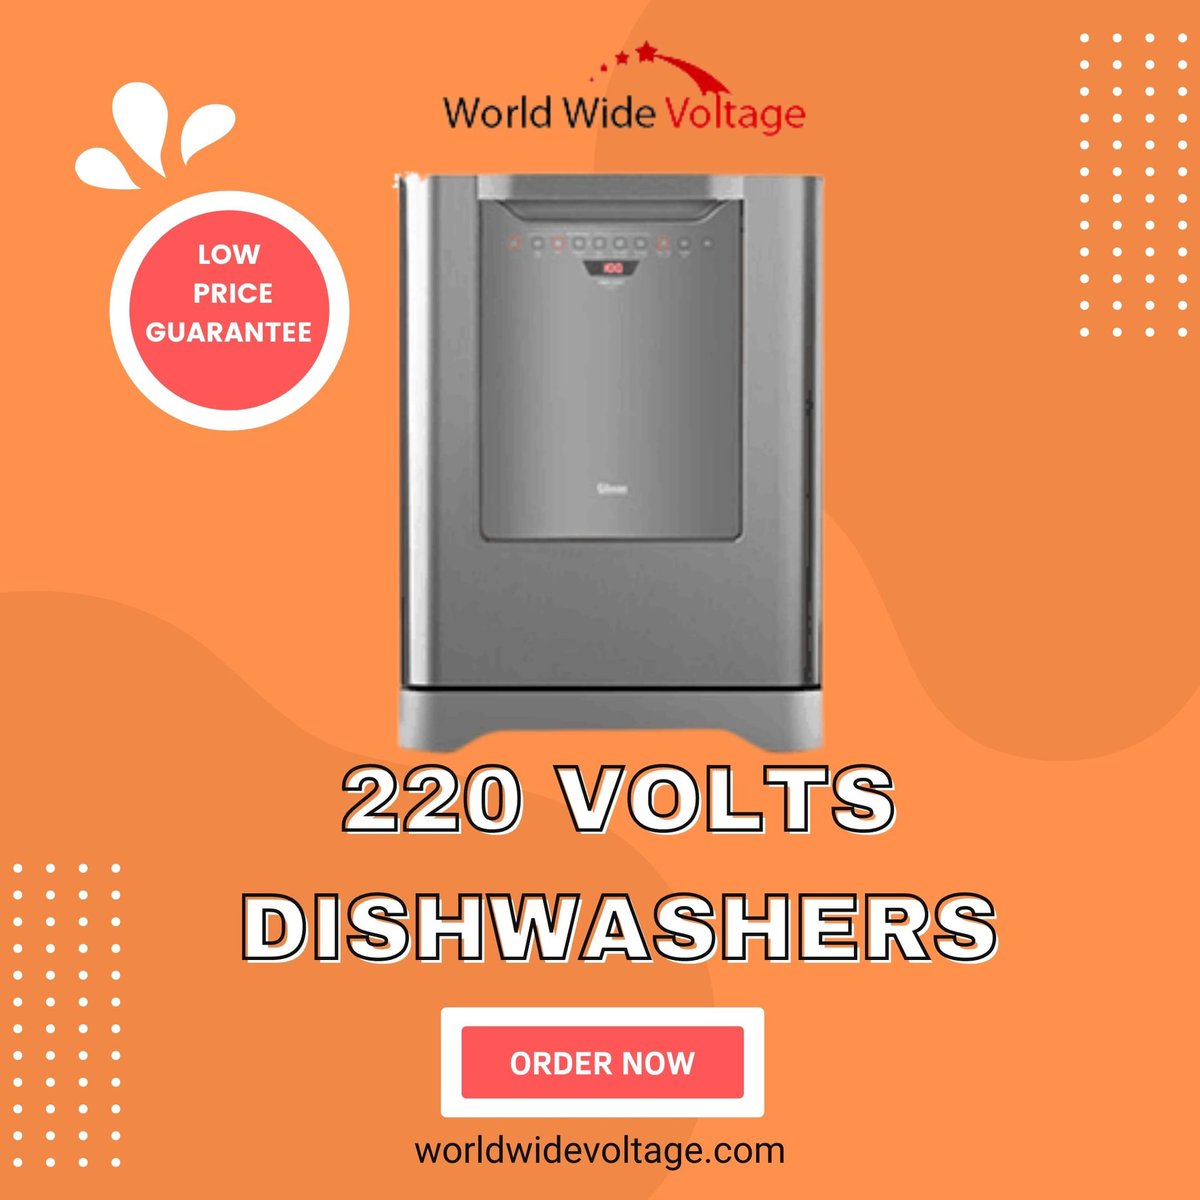 Make dishwashing easier with #Worldwidevoltage's #220voltdishwashers. Our #dishwashers are engineered to provide sparkling clean dishes with each cycle. With several wash settings and energy-saving features, they're ideal for any kitchen.worldwidevoltage.com/dishwasher.html #KitchenAppliances